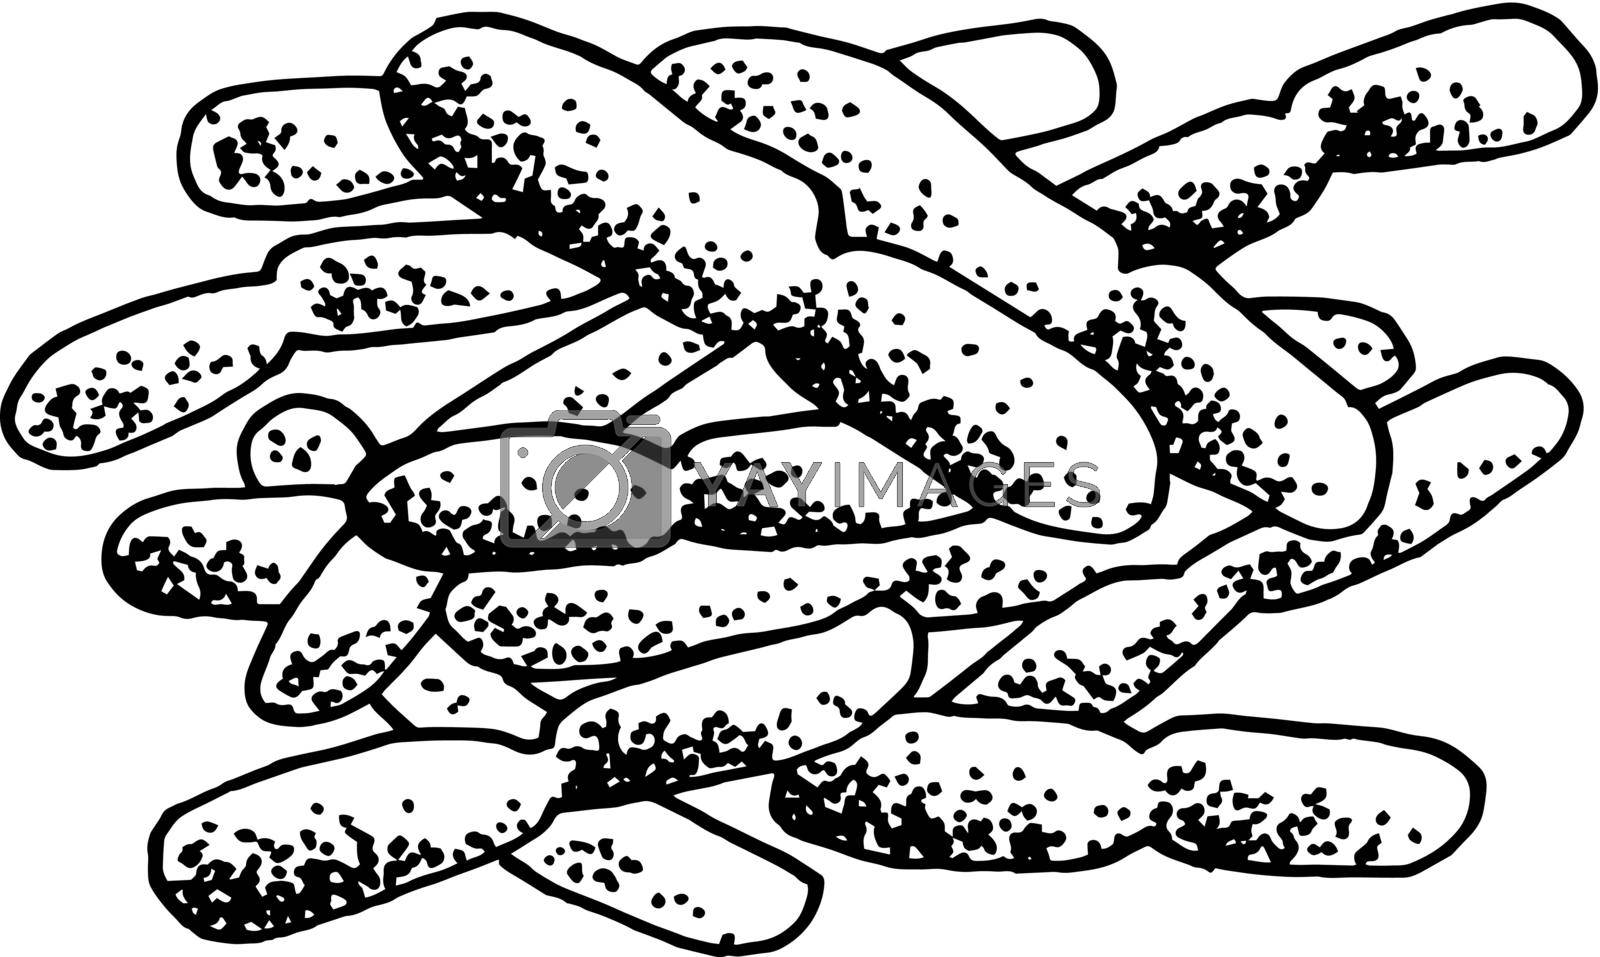 Royalty free image of Vector black sketch bacteria isolated on white backgtound. Microbe in medical therapy. Germ illness element. Hand painted bacterium for medicine concept. by DesignAB